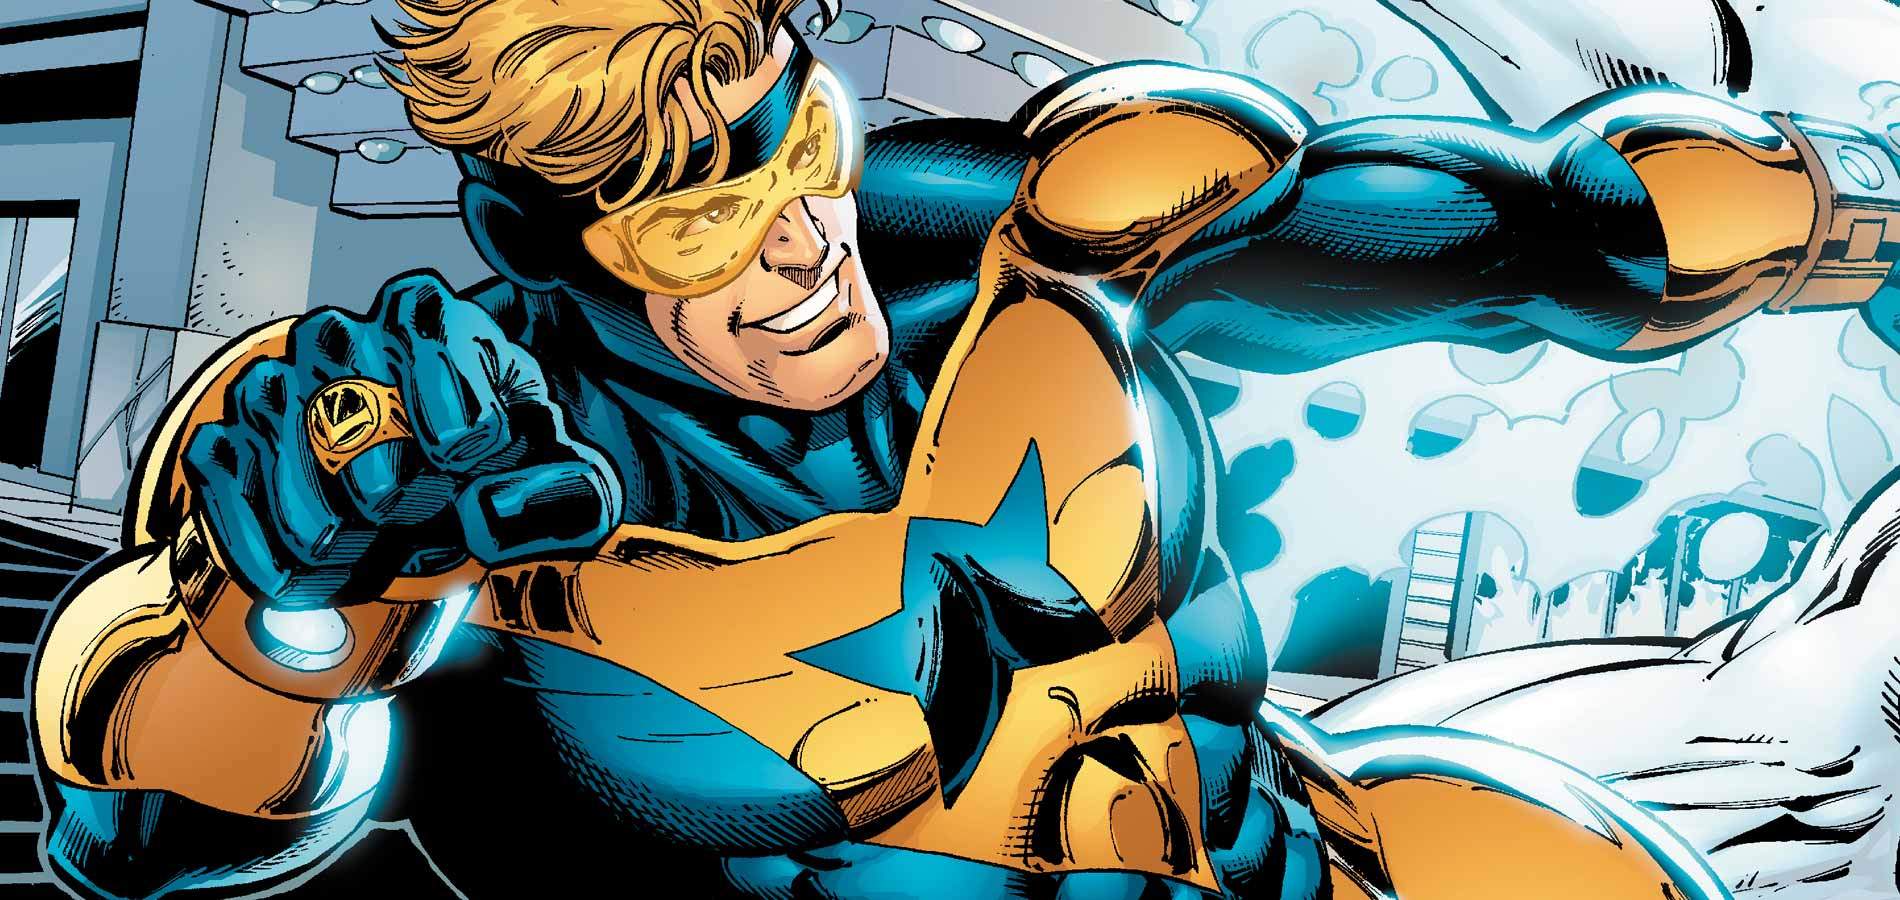 Nathan Fillion eyeing Booster Gold?